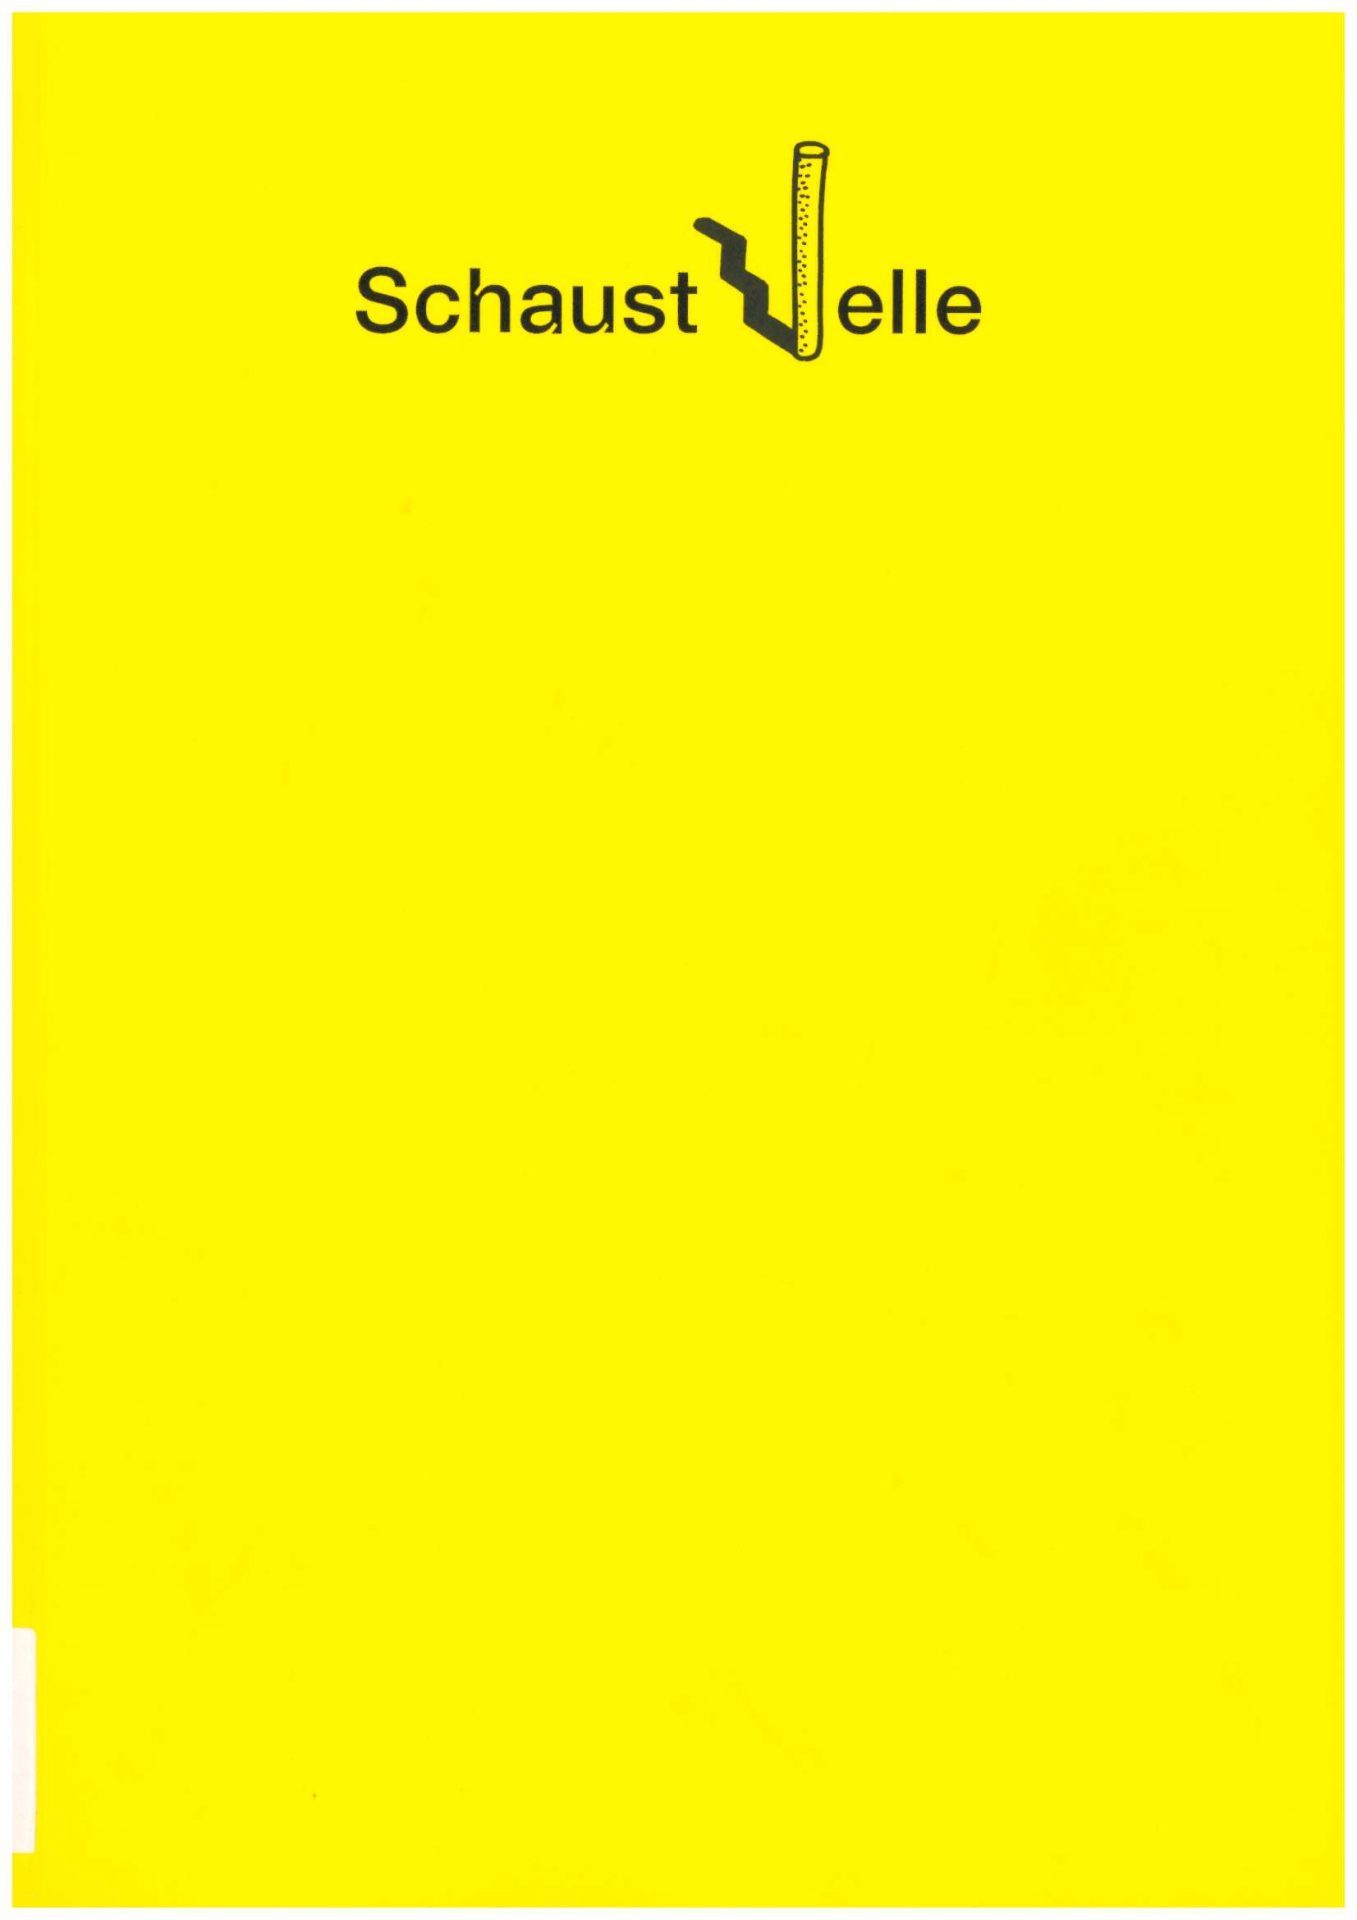 Black lettering on a yellow background: schaust - elle where the two syllables are separated by a tall cylinder that casts a stair-like shadow.